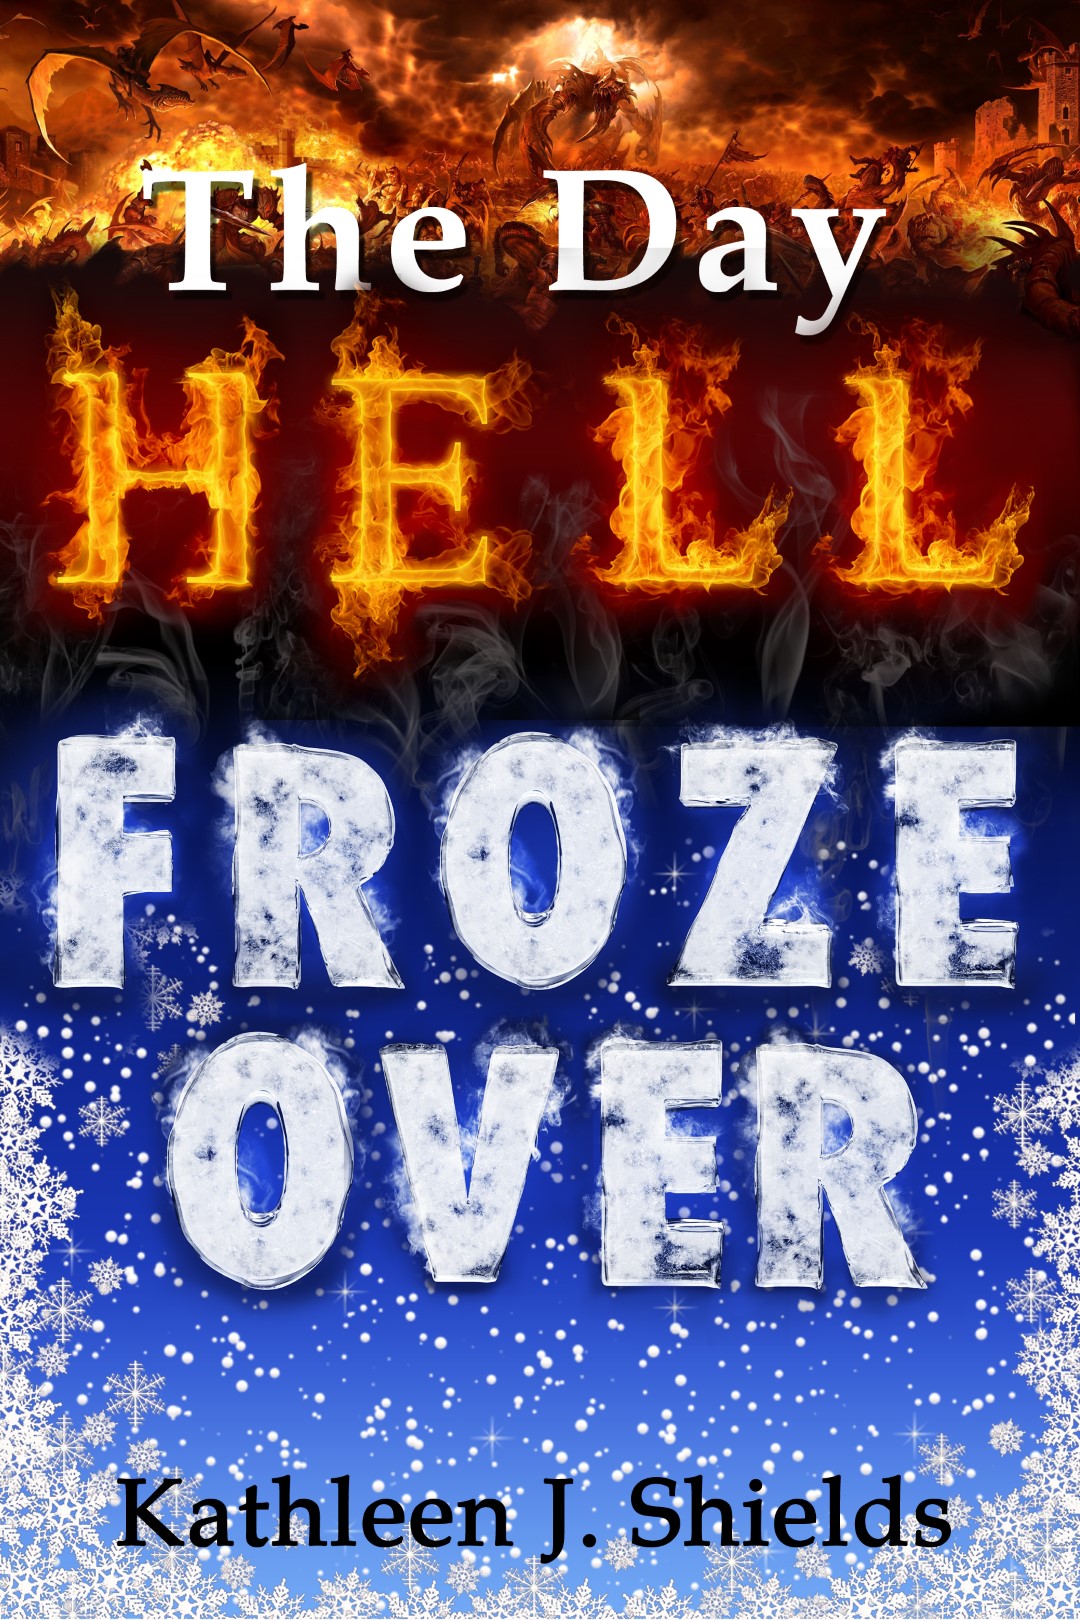 The Day Hell Froze Over short story ebook by author Kathleen J. Shields